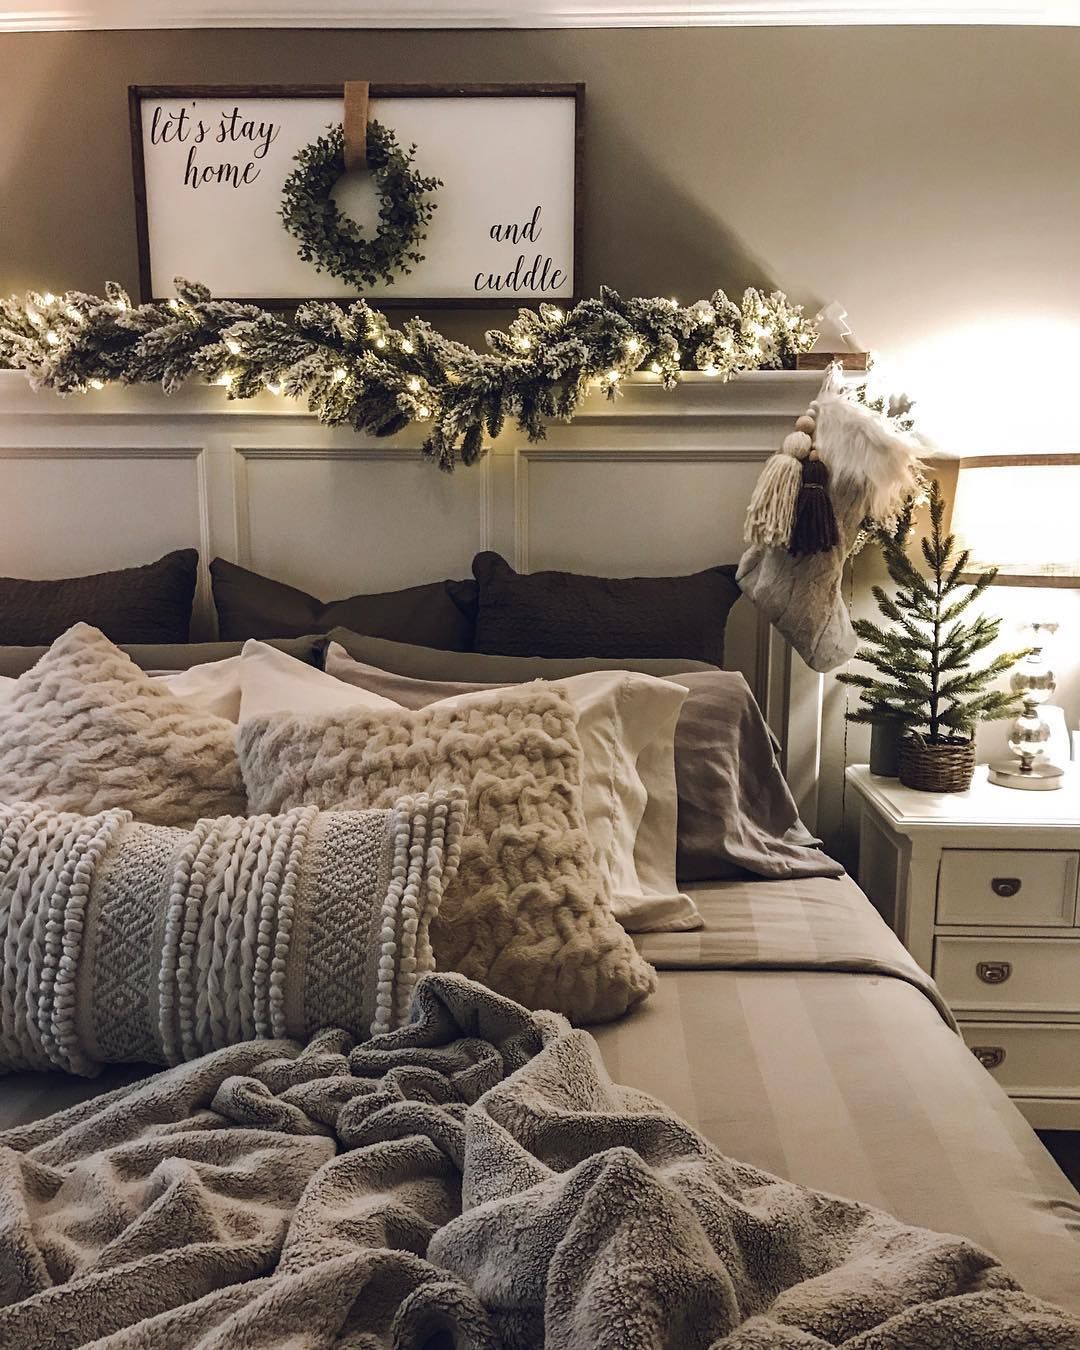 Top 37 Christmas Bedroom Decorations Ideas 2020 - Page 5 of 37 - newyearlights. com - Top 37 Christmas Bedroom Decorations Ideas 2020 - Page 5 of 37 - newyearlights. com -   16 christmas decor for bedroom ideas